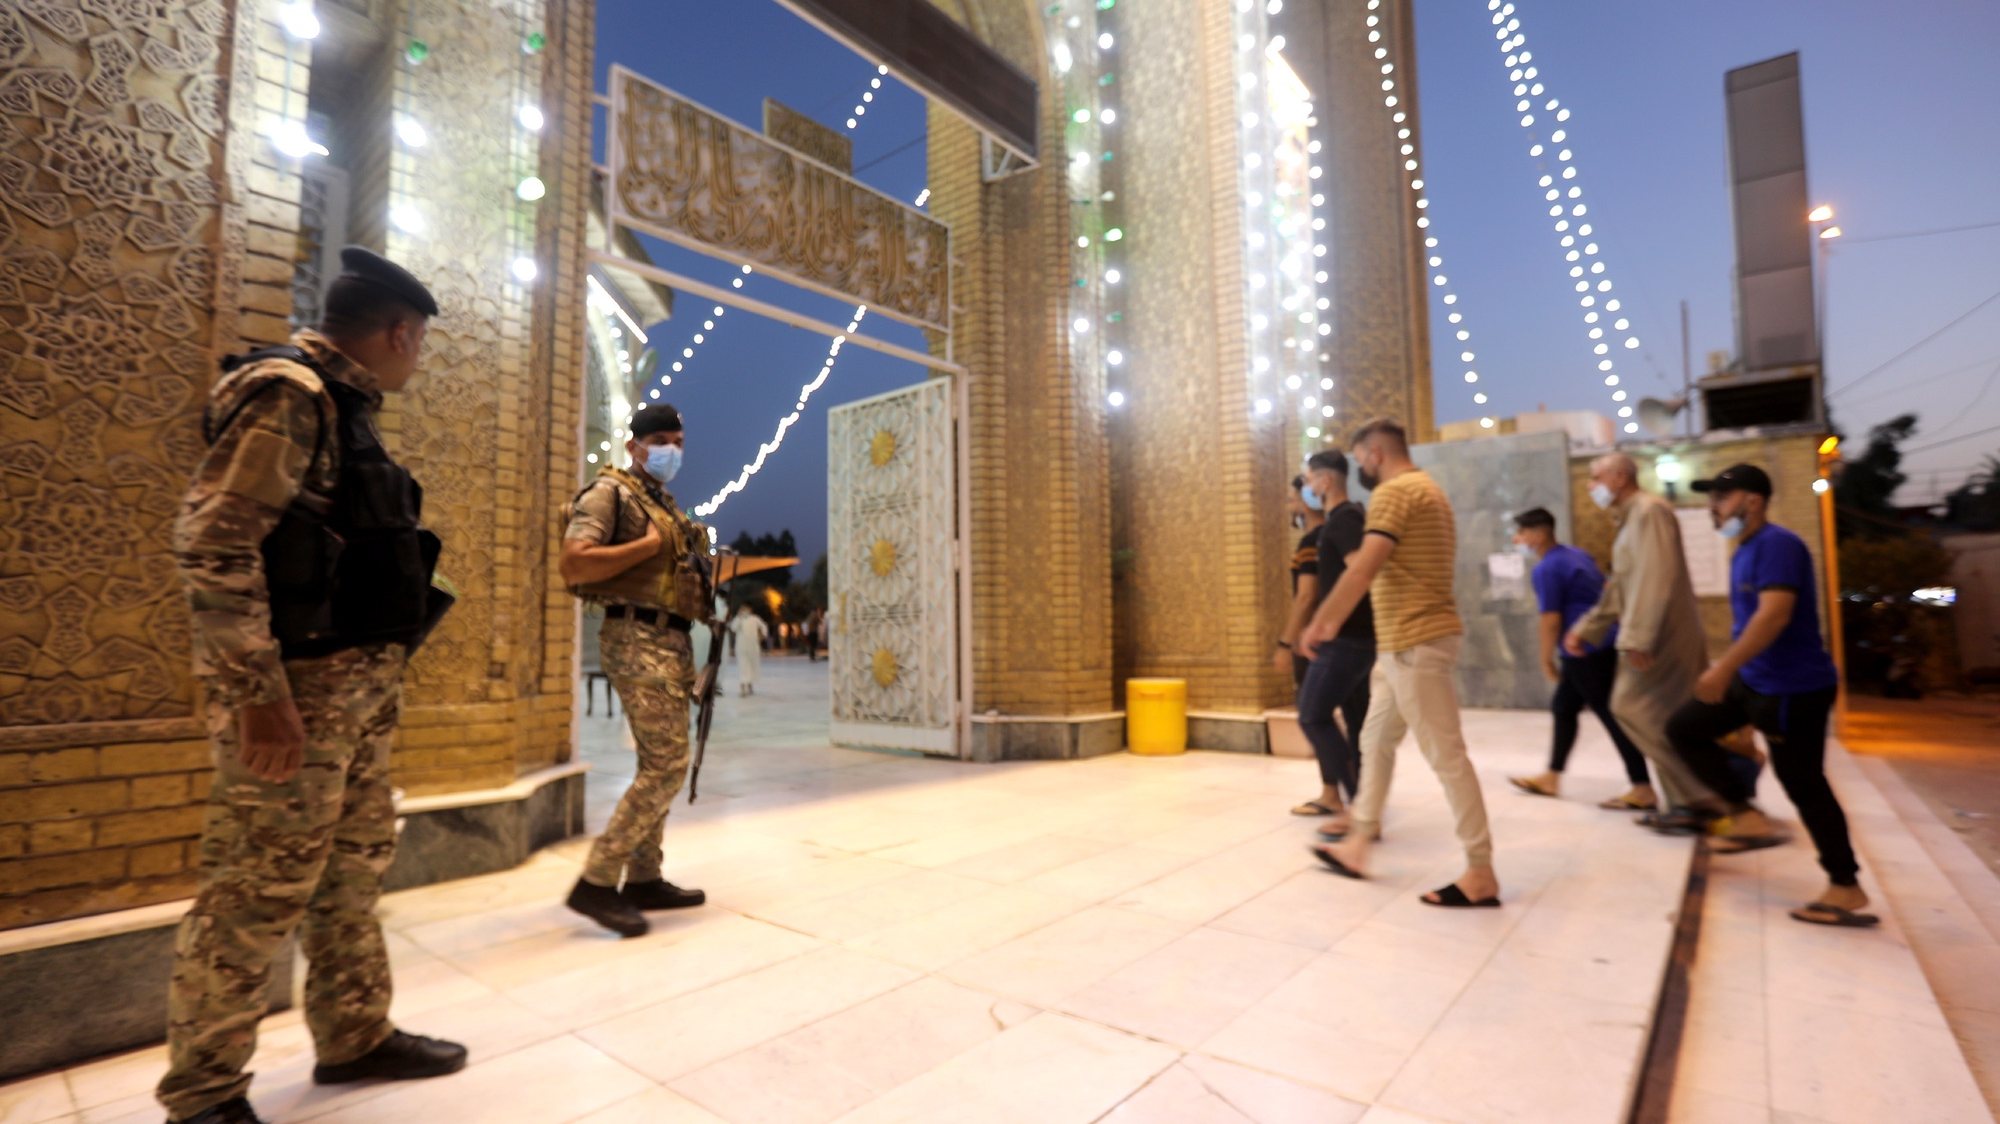 epa09354337 Iraqi policemen stand guard as Iraqi Sunni Muslims arrive to perform Eid Al-Adha prayers amid the COVID-19 pandemic at the  Abu Hanifa mosque in Baghdad&#039;s Adhamiya district, Iraq, 20 July 2021. Eid al-Adha is the holier of the two Muslims holidays celebrated each year; it marks the yearly Muslim pilgrimage (Hajj) to visit Mecca, the holiest place in Islam. Muslims slaughter a sacrificial animal and split the meat into three parts, one for the family, one for friends and relatives, and one for the poor and needy.  EPA/AHMED JALIL